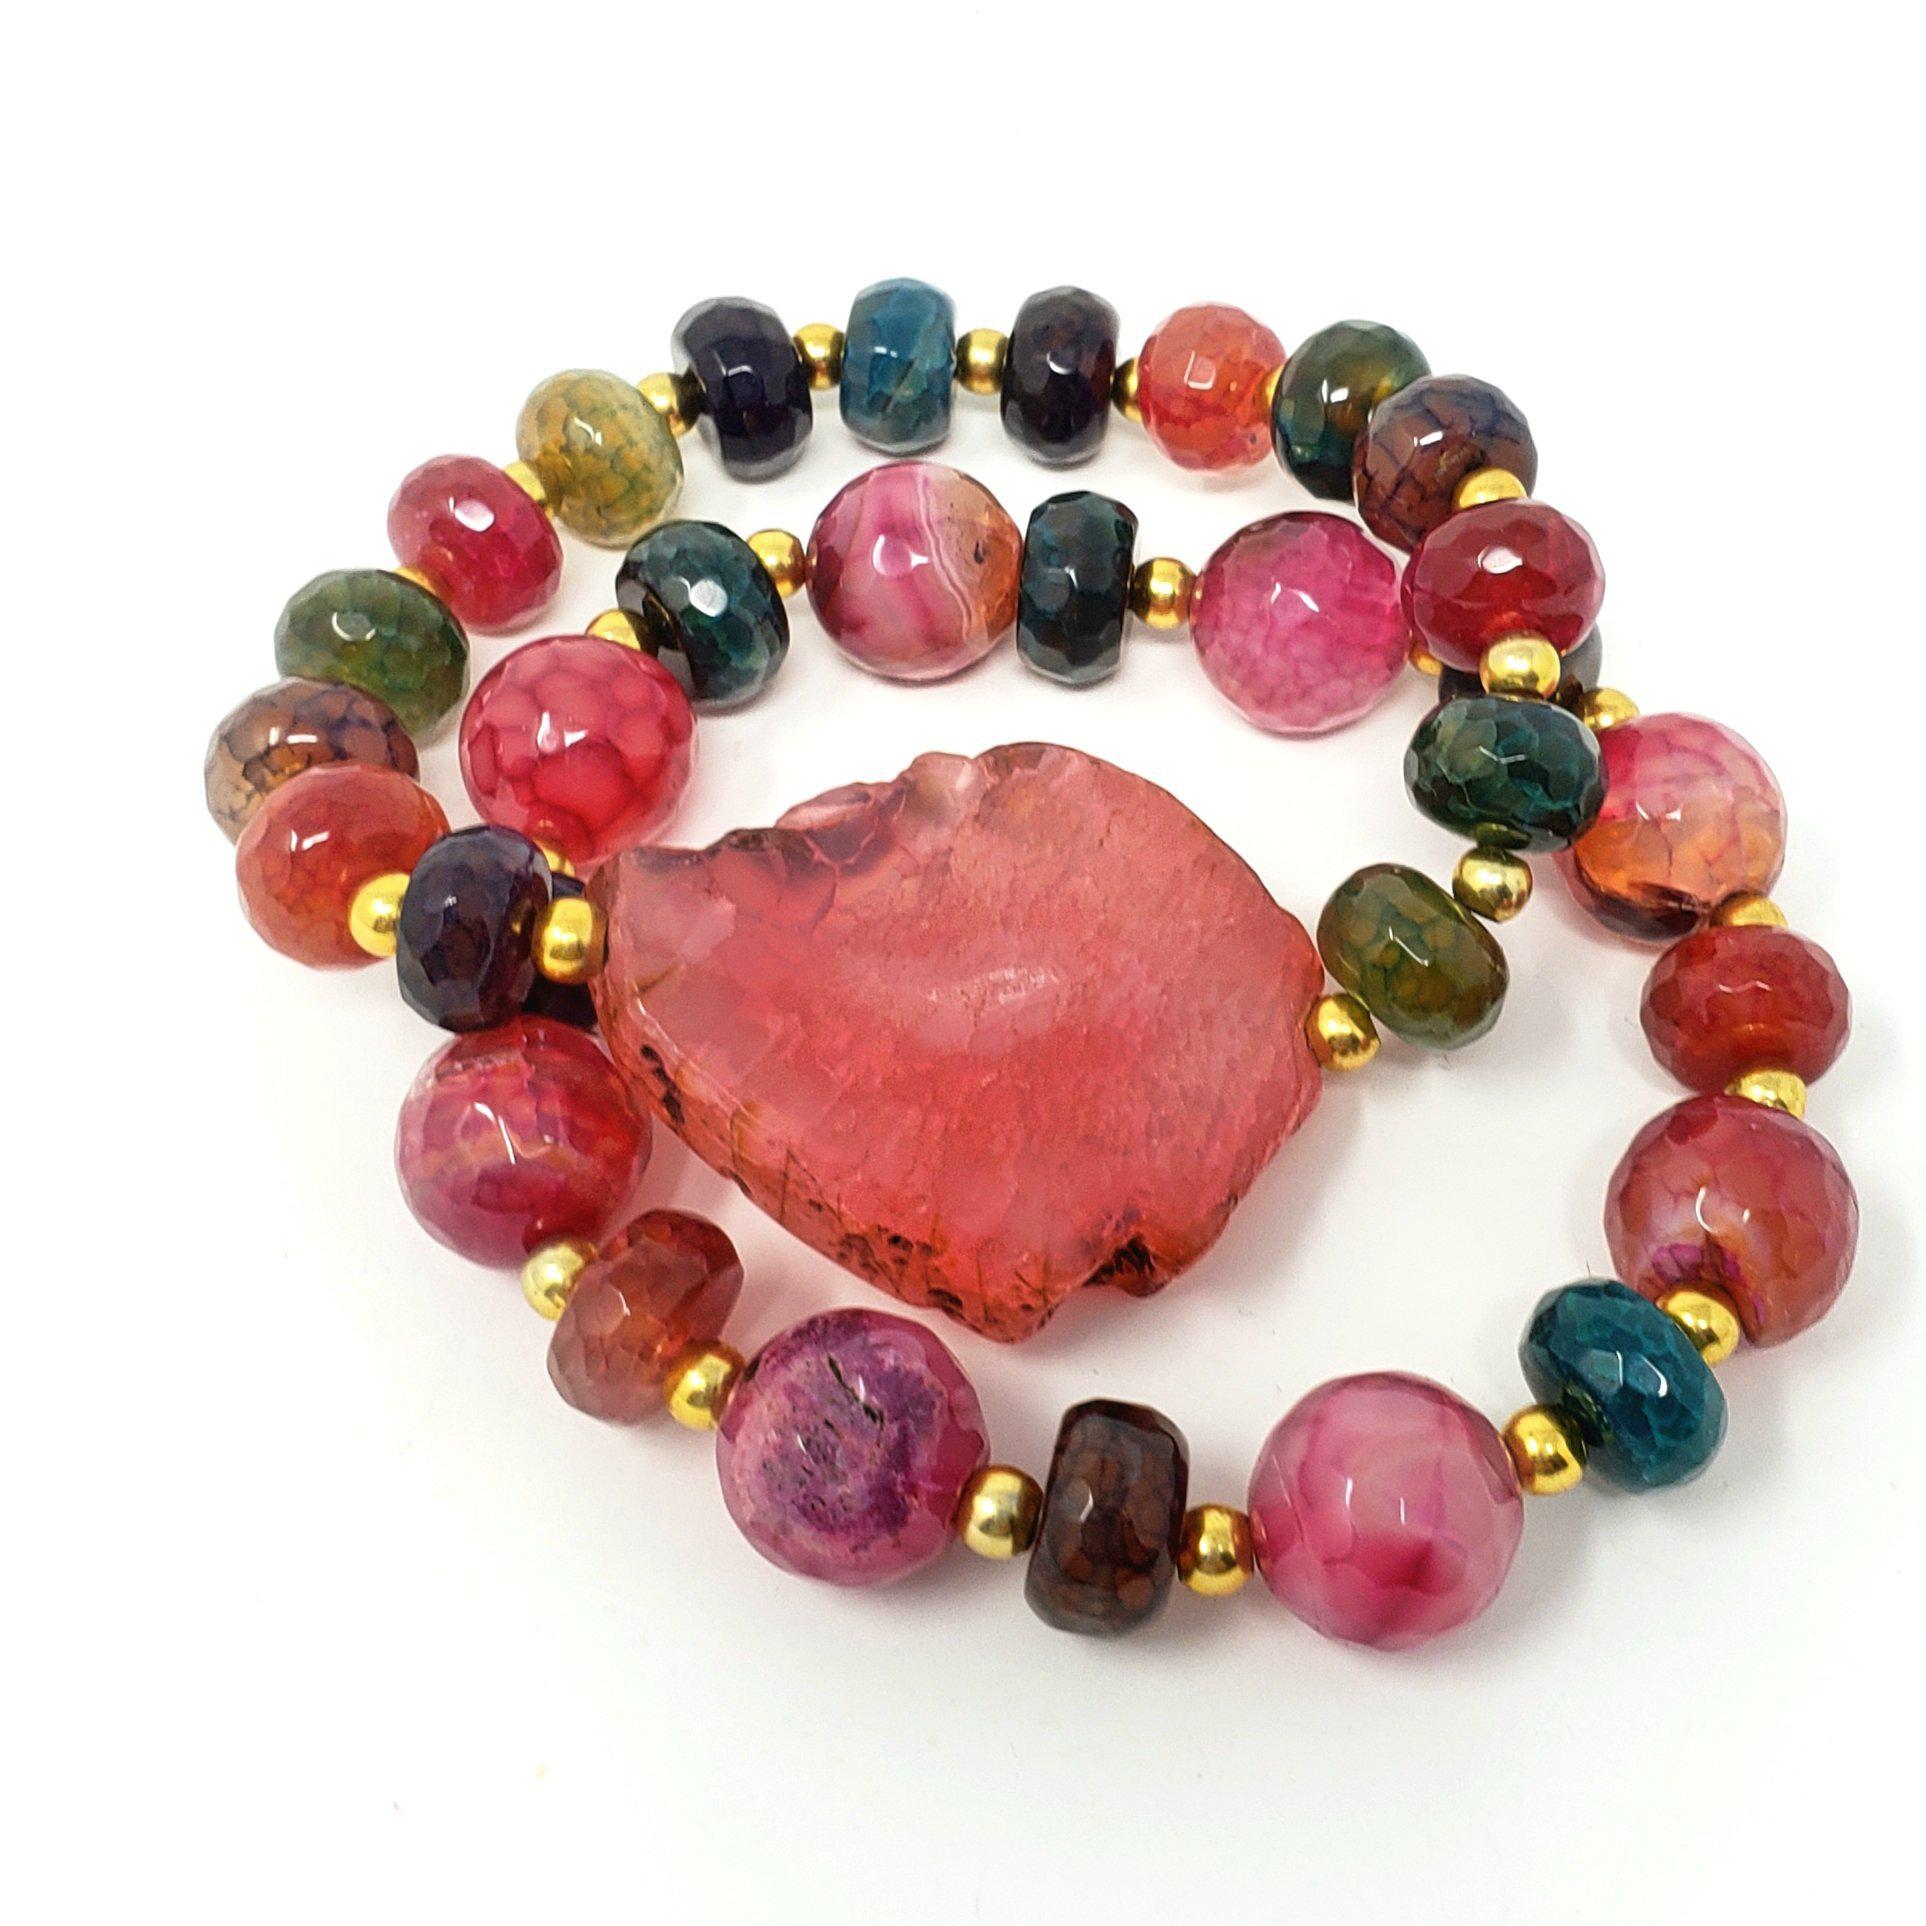 Multicolored Agate Necklace and Bracelets